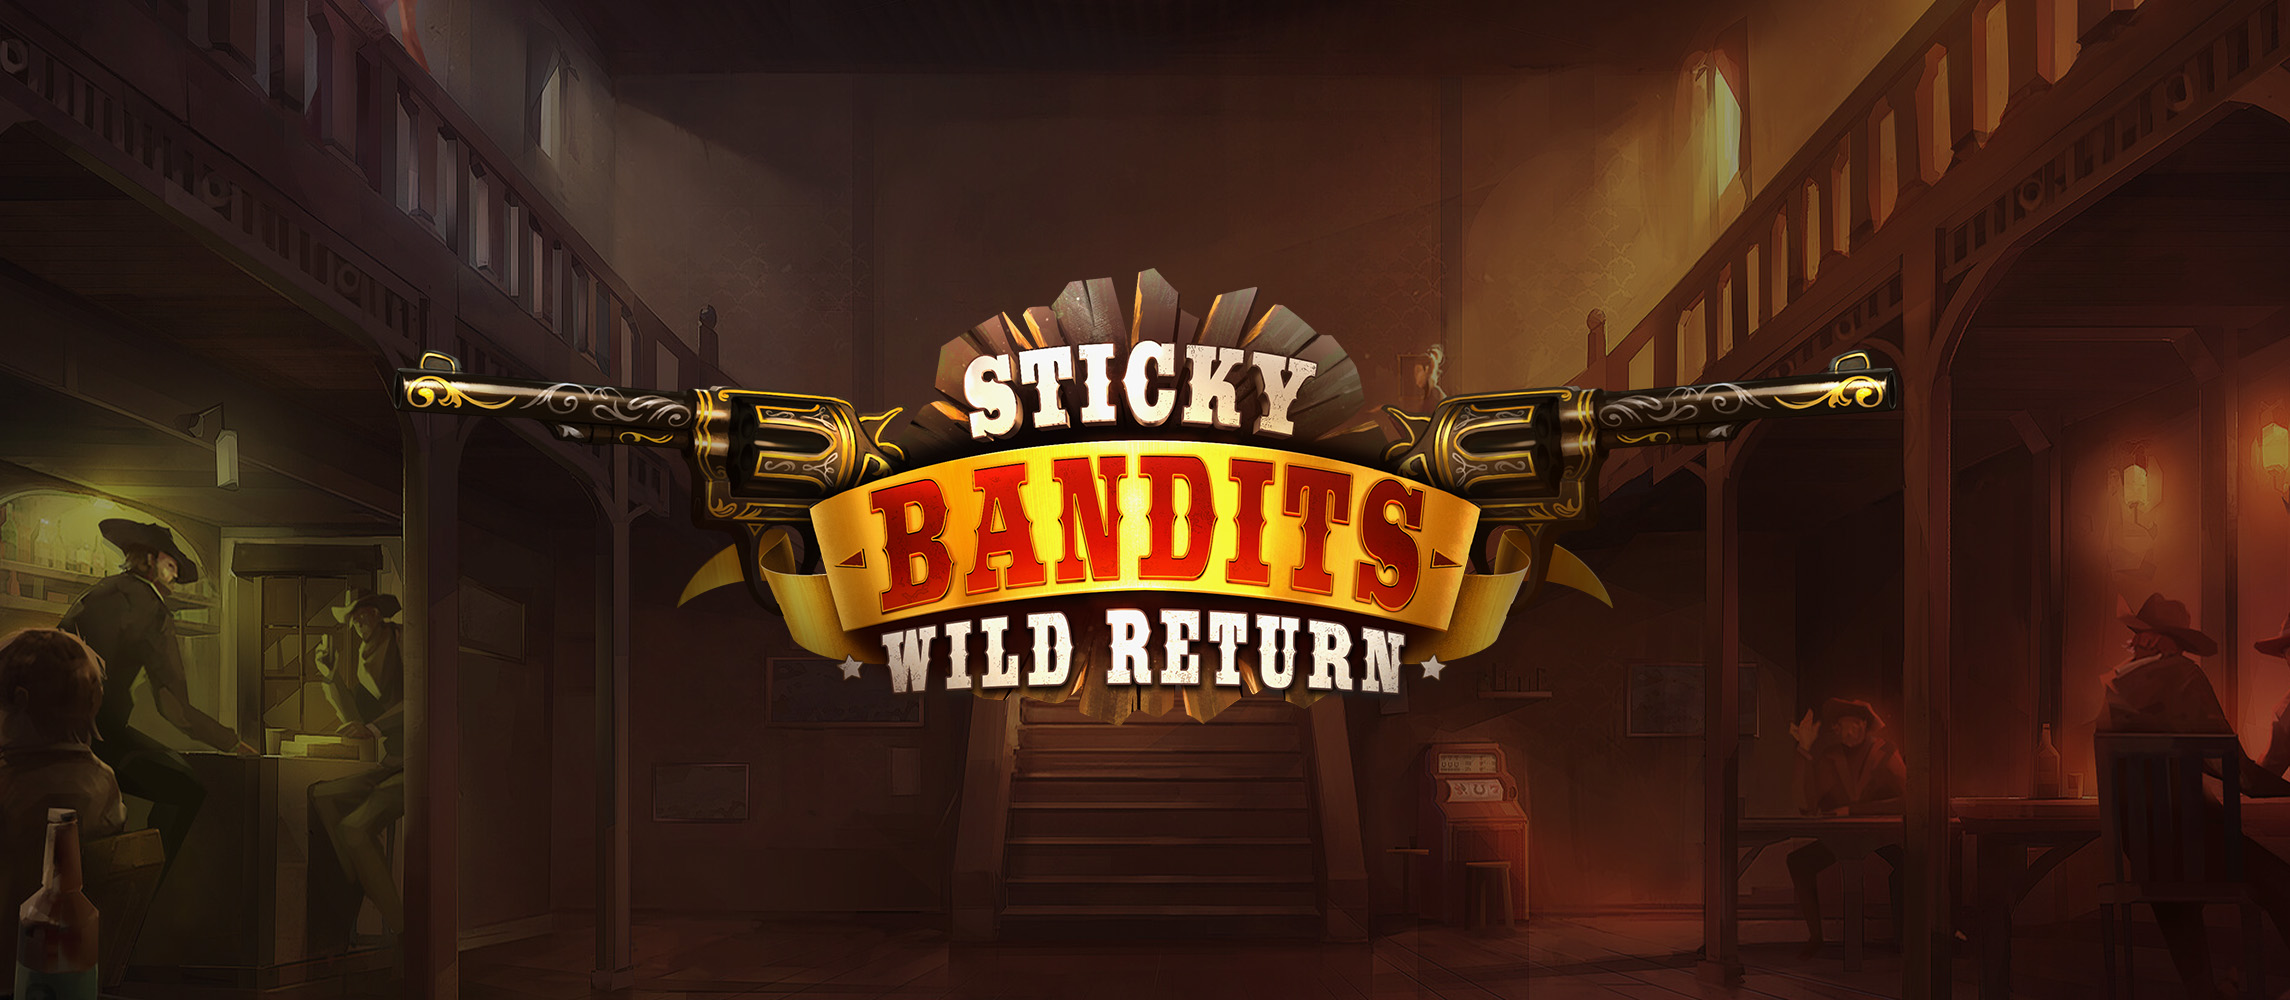 Sticky Bandits: Wild Return offers top features and graphics for fun spinning.